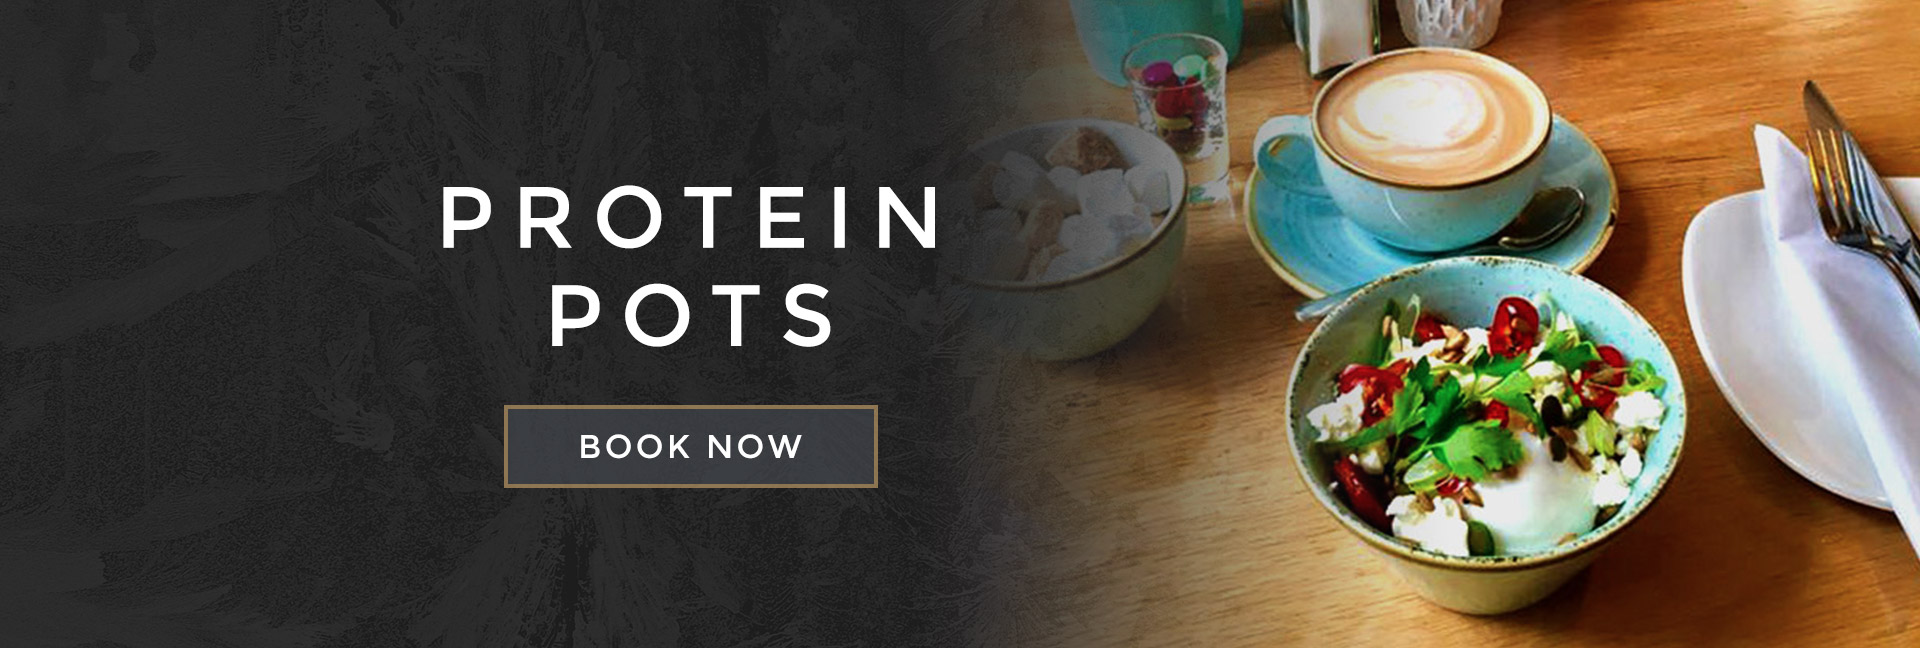 Protein pots at All Bar One Worcester - Book your table